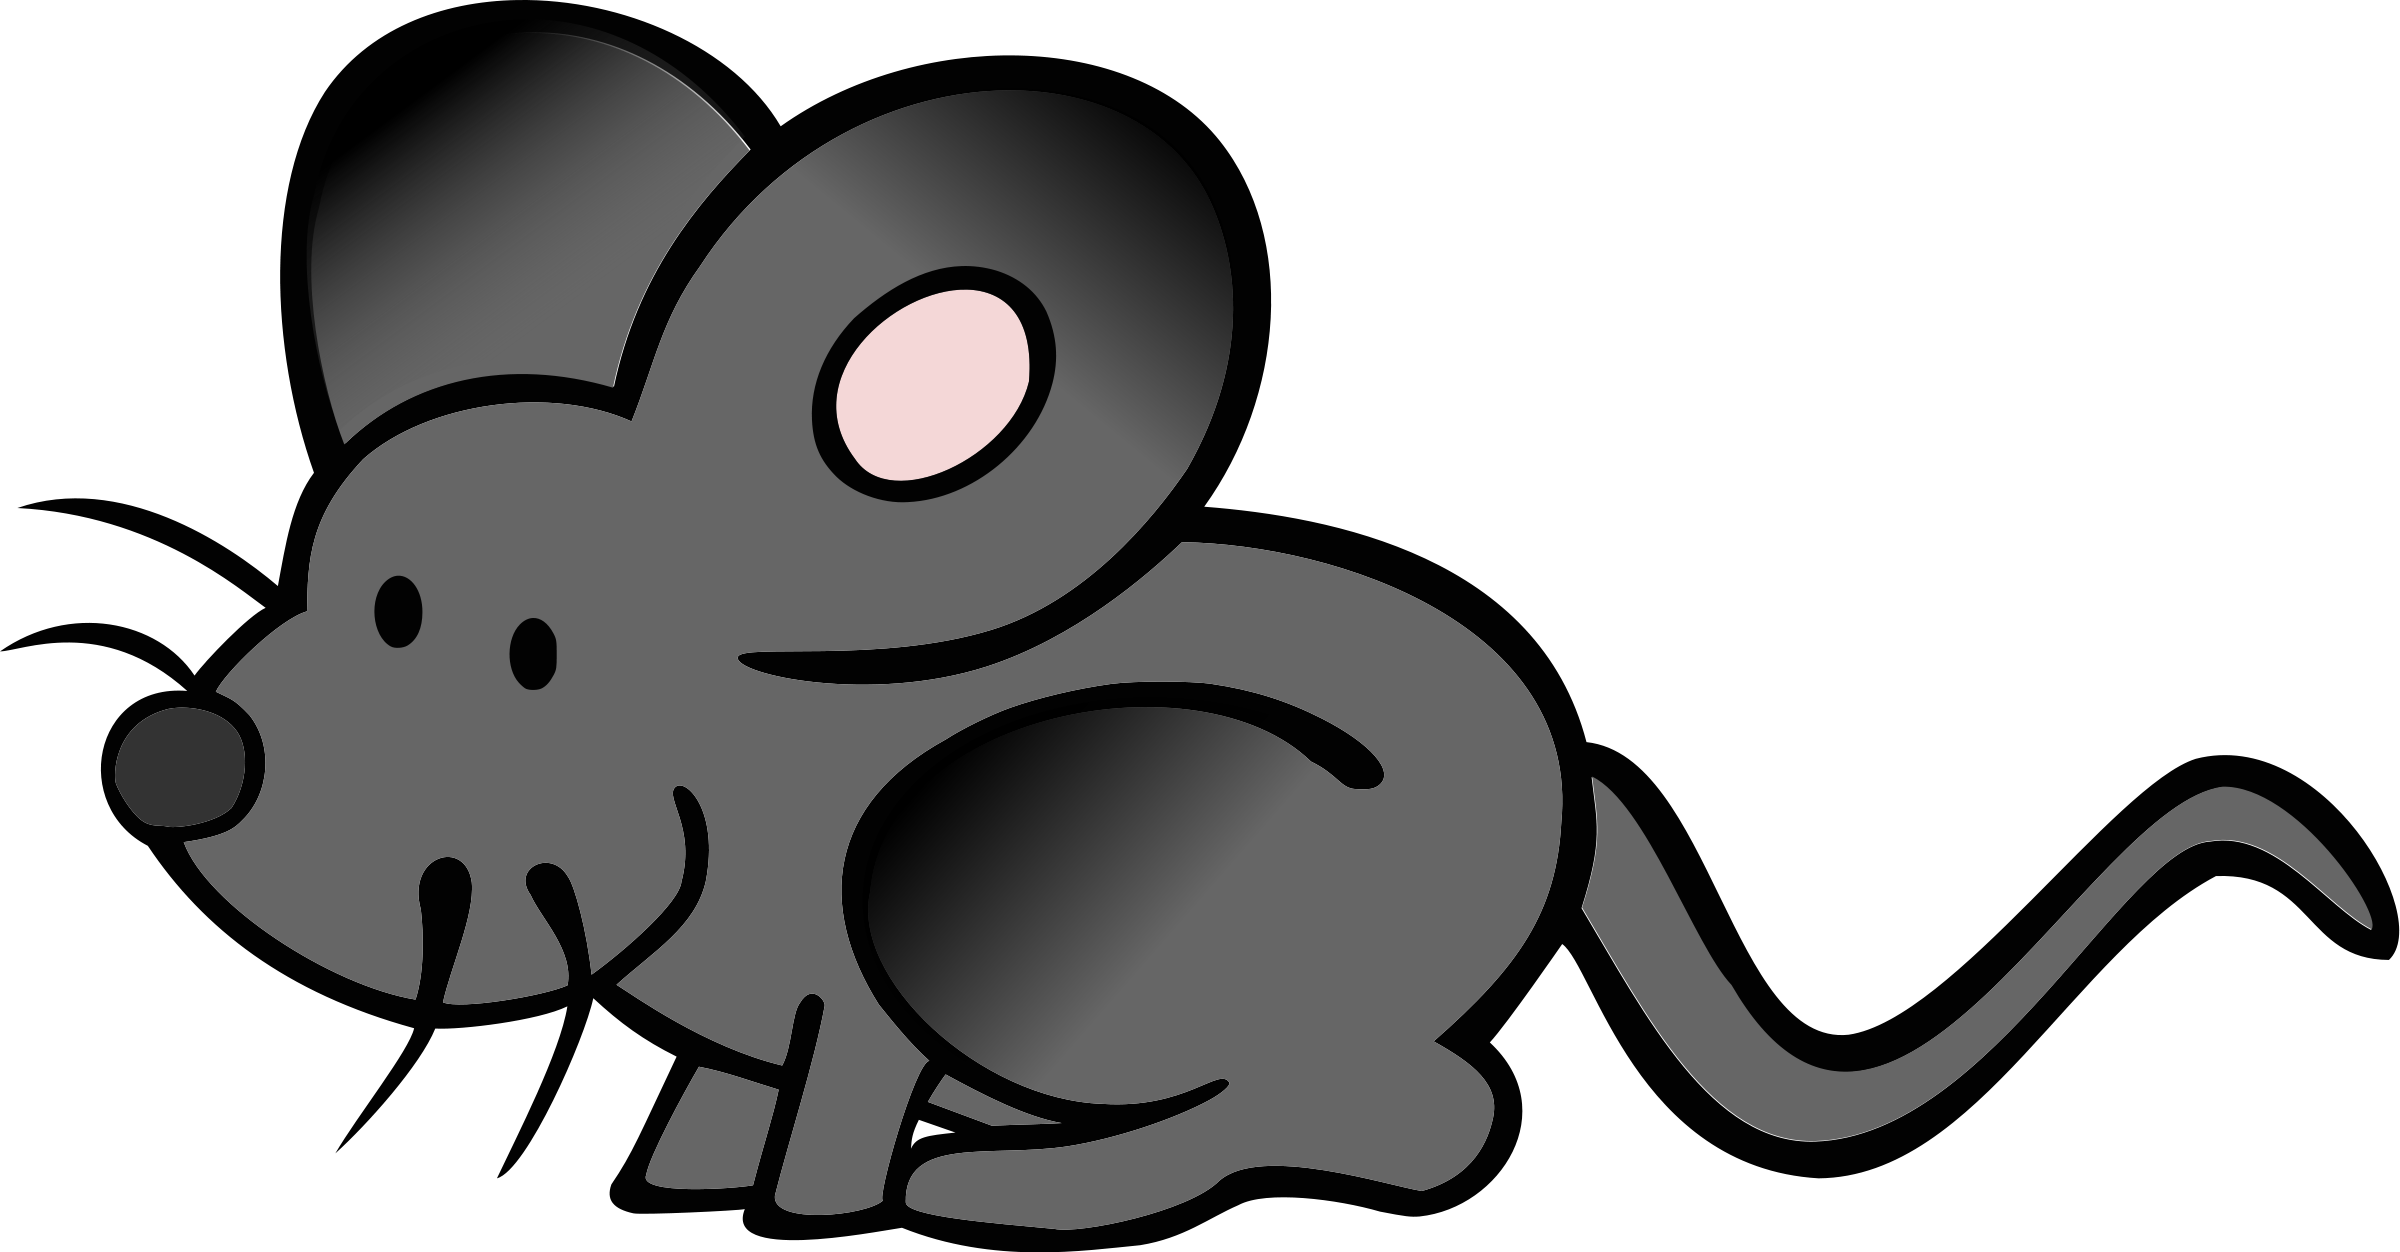 Search results for "mouse" clipart